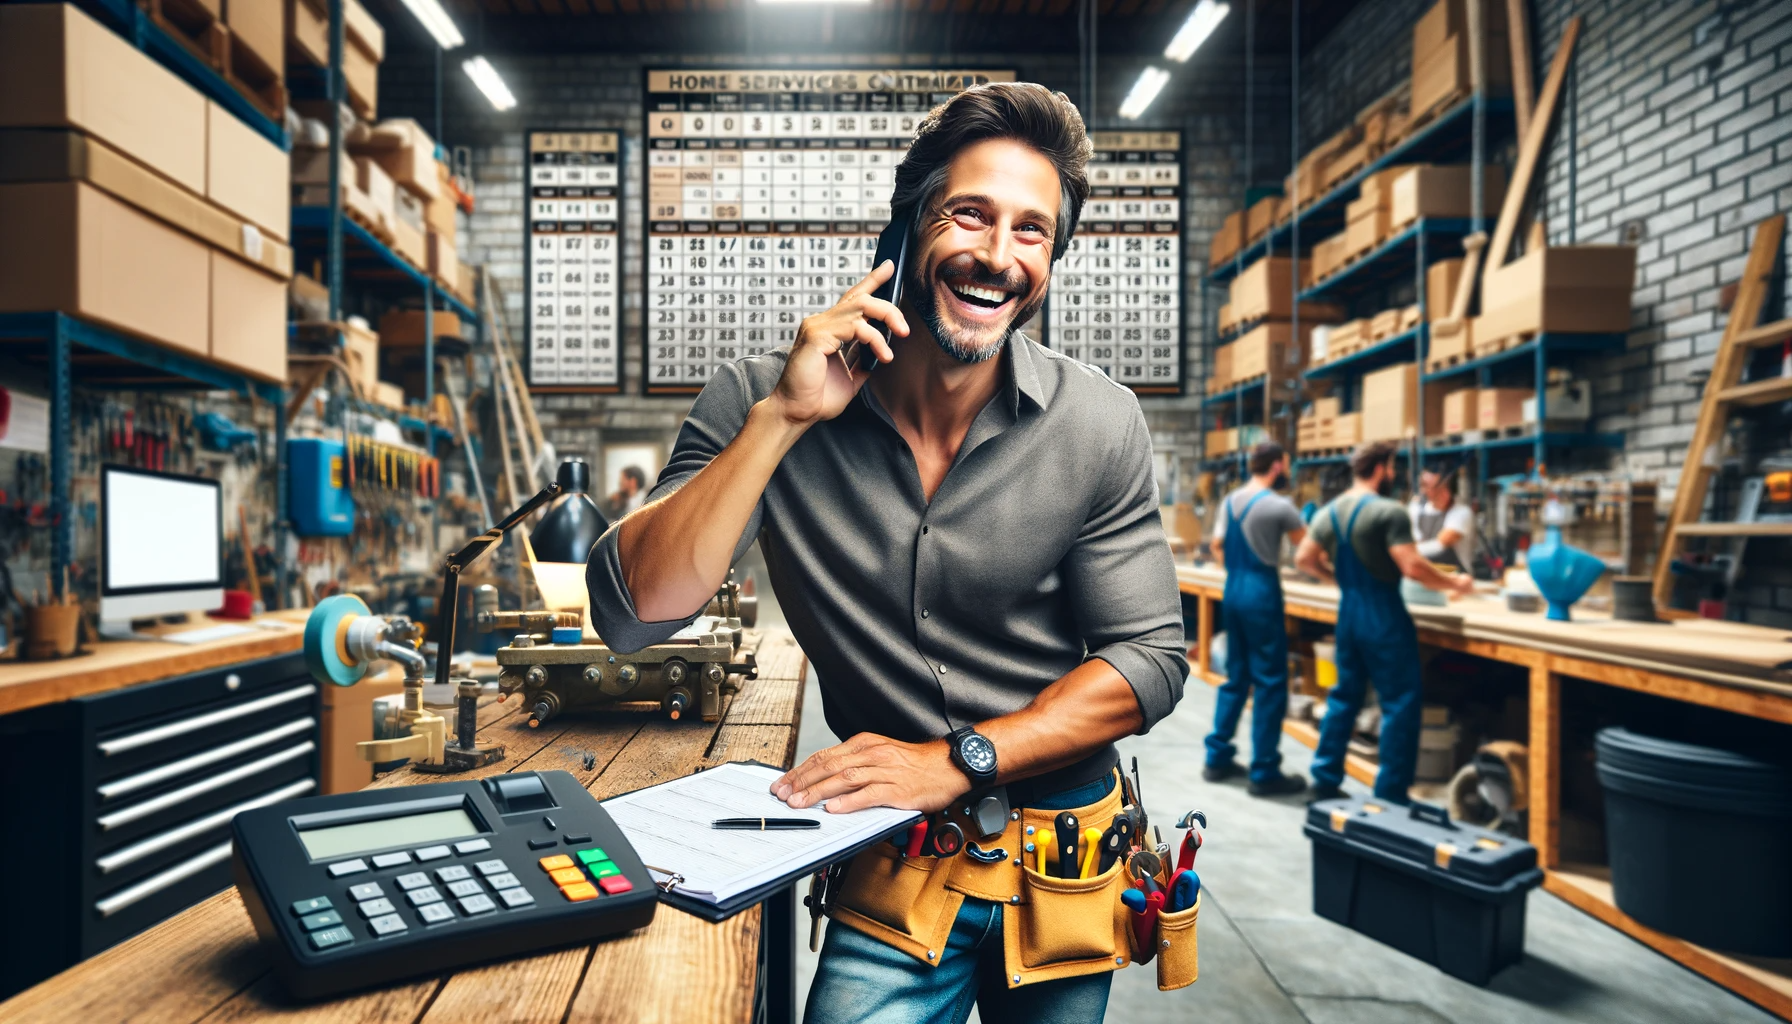 a joyful home services contractor at their companys warehouse, surrounded by the bustling activi